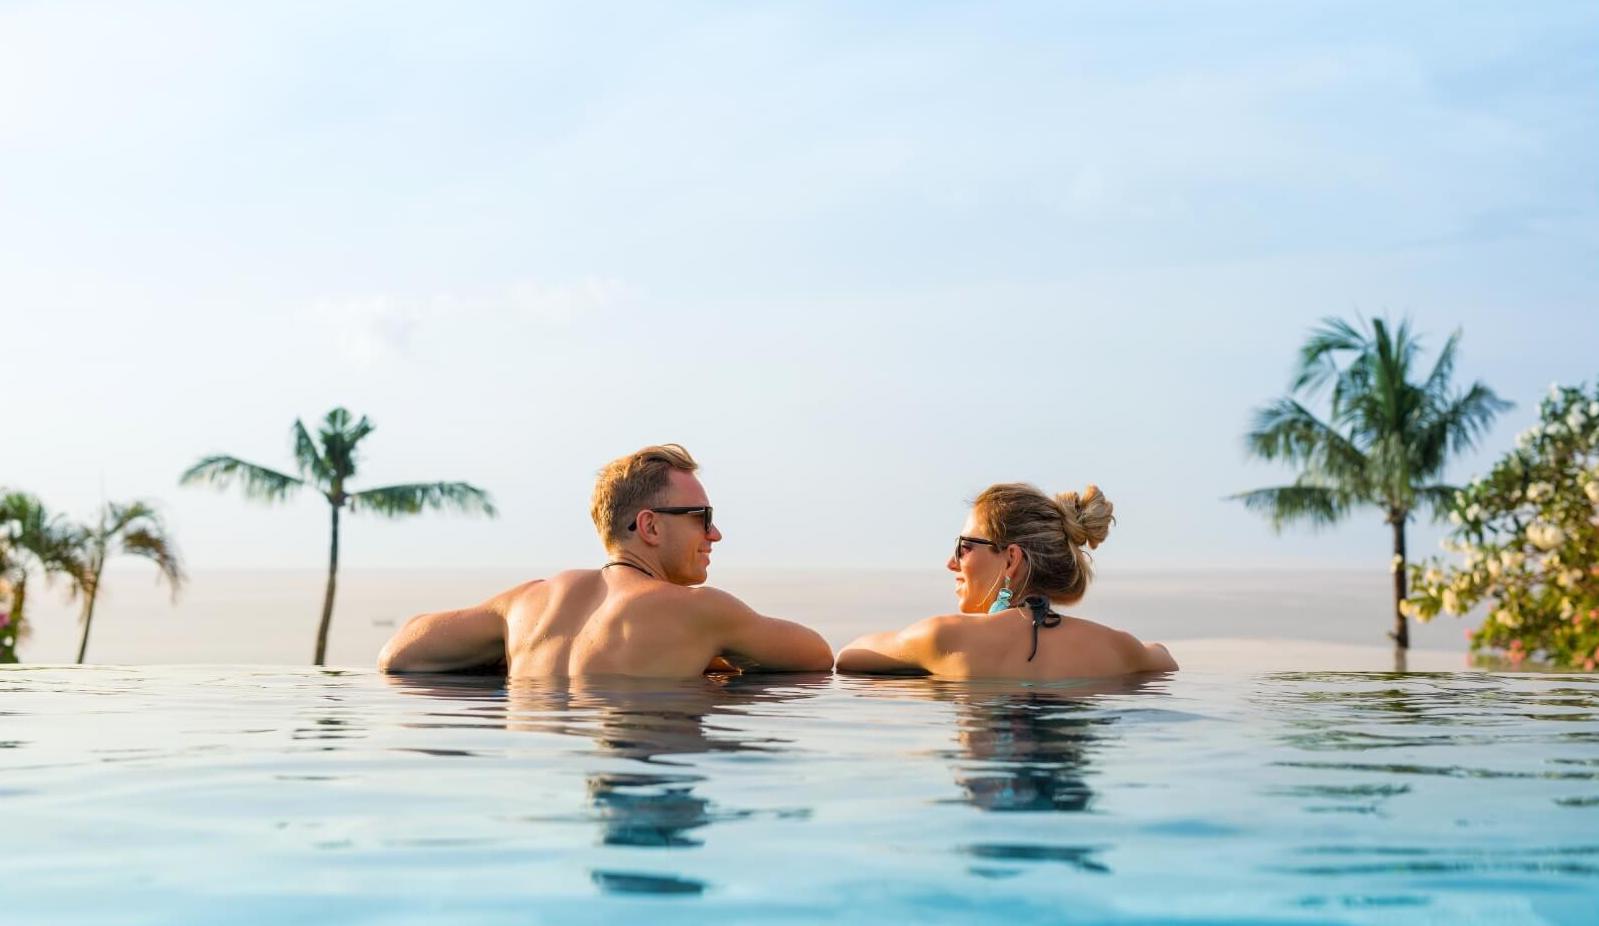 A man and a woman practicing mindfulness in a serene pool setting during their mindfulness retreats on an island.